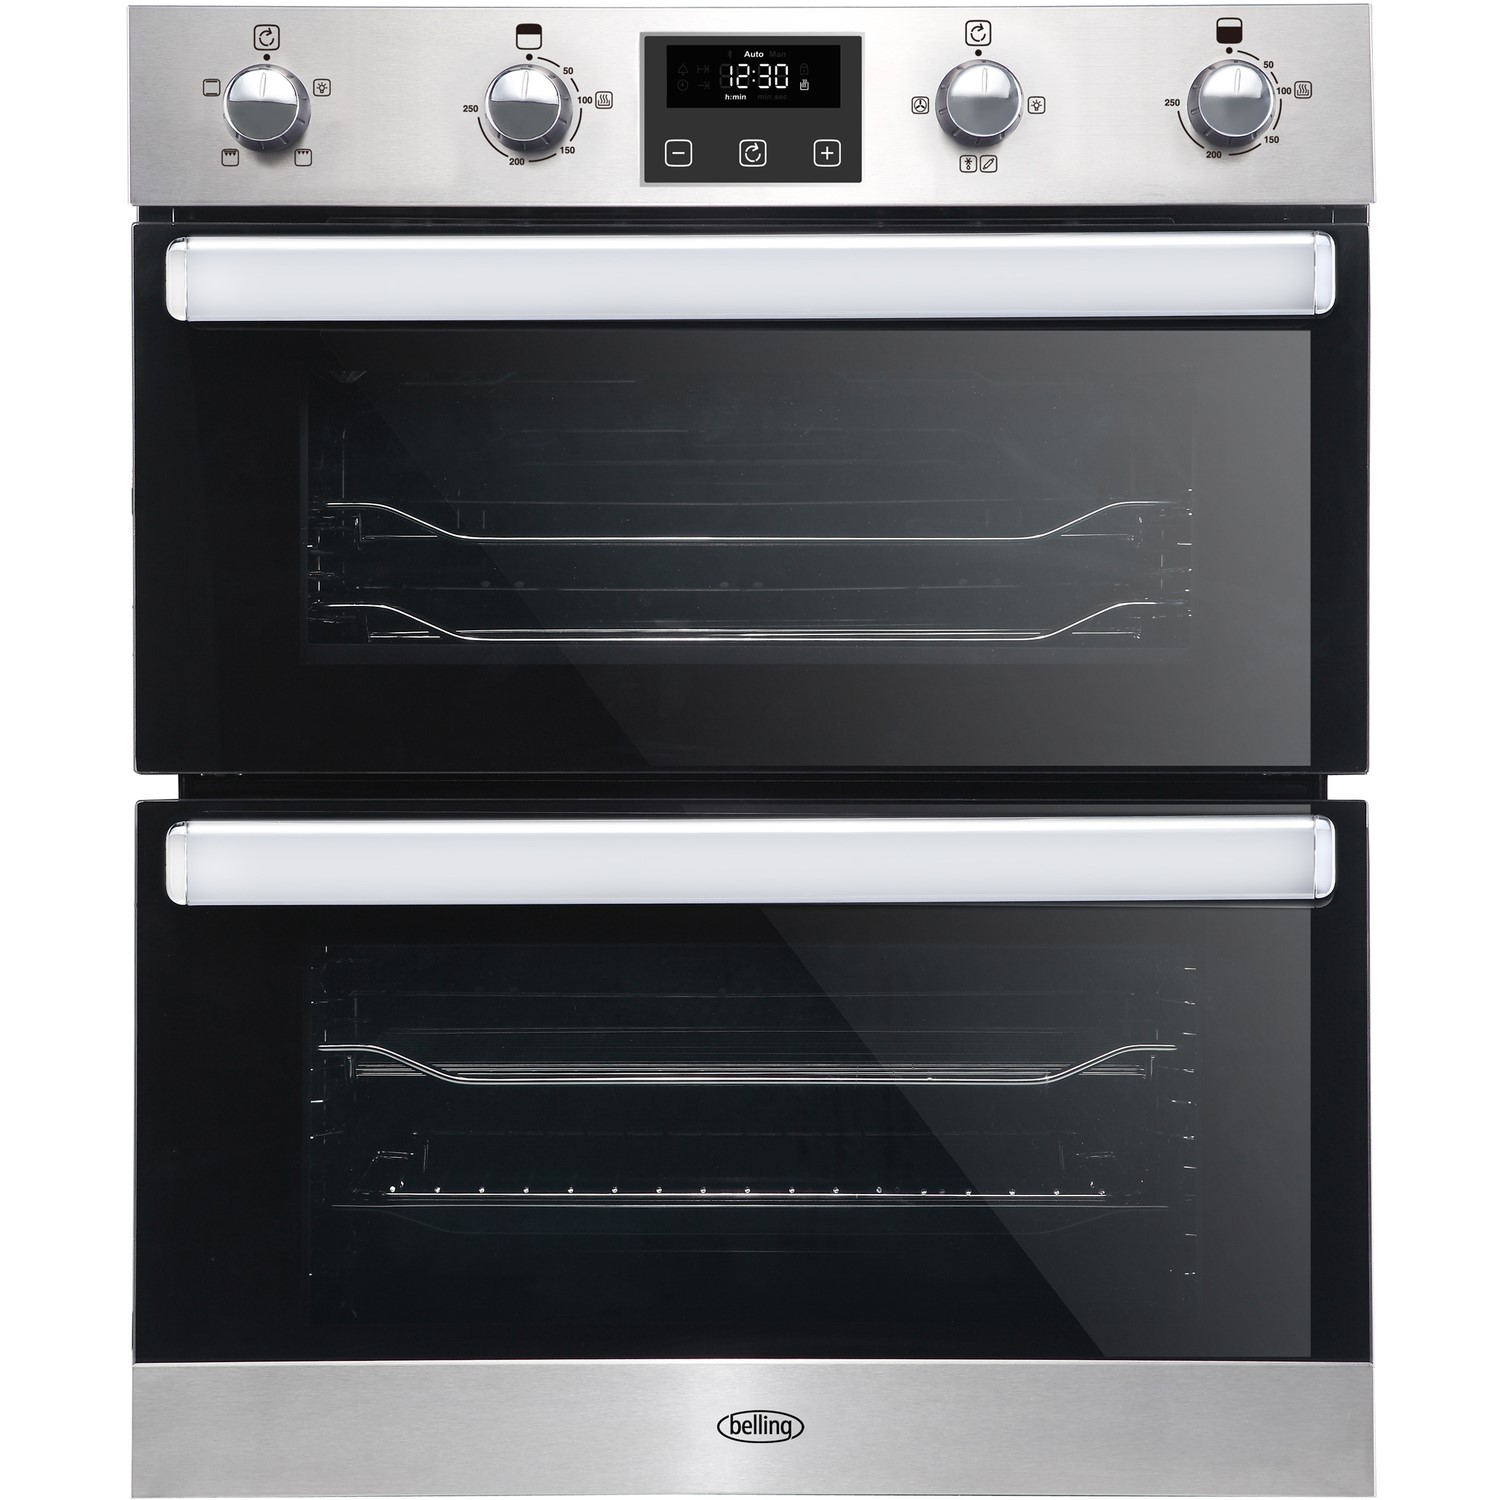 Belling BI702FPCT Built Under Double Oven with Catalytic Liners - Stainless Steel